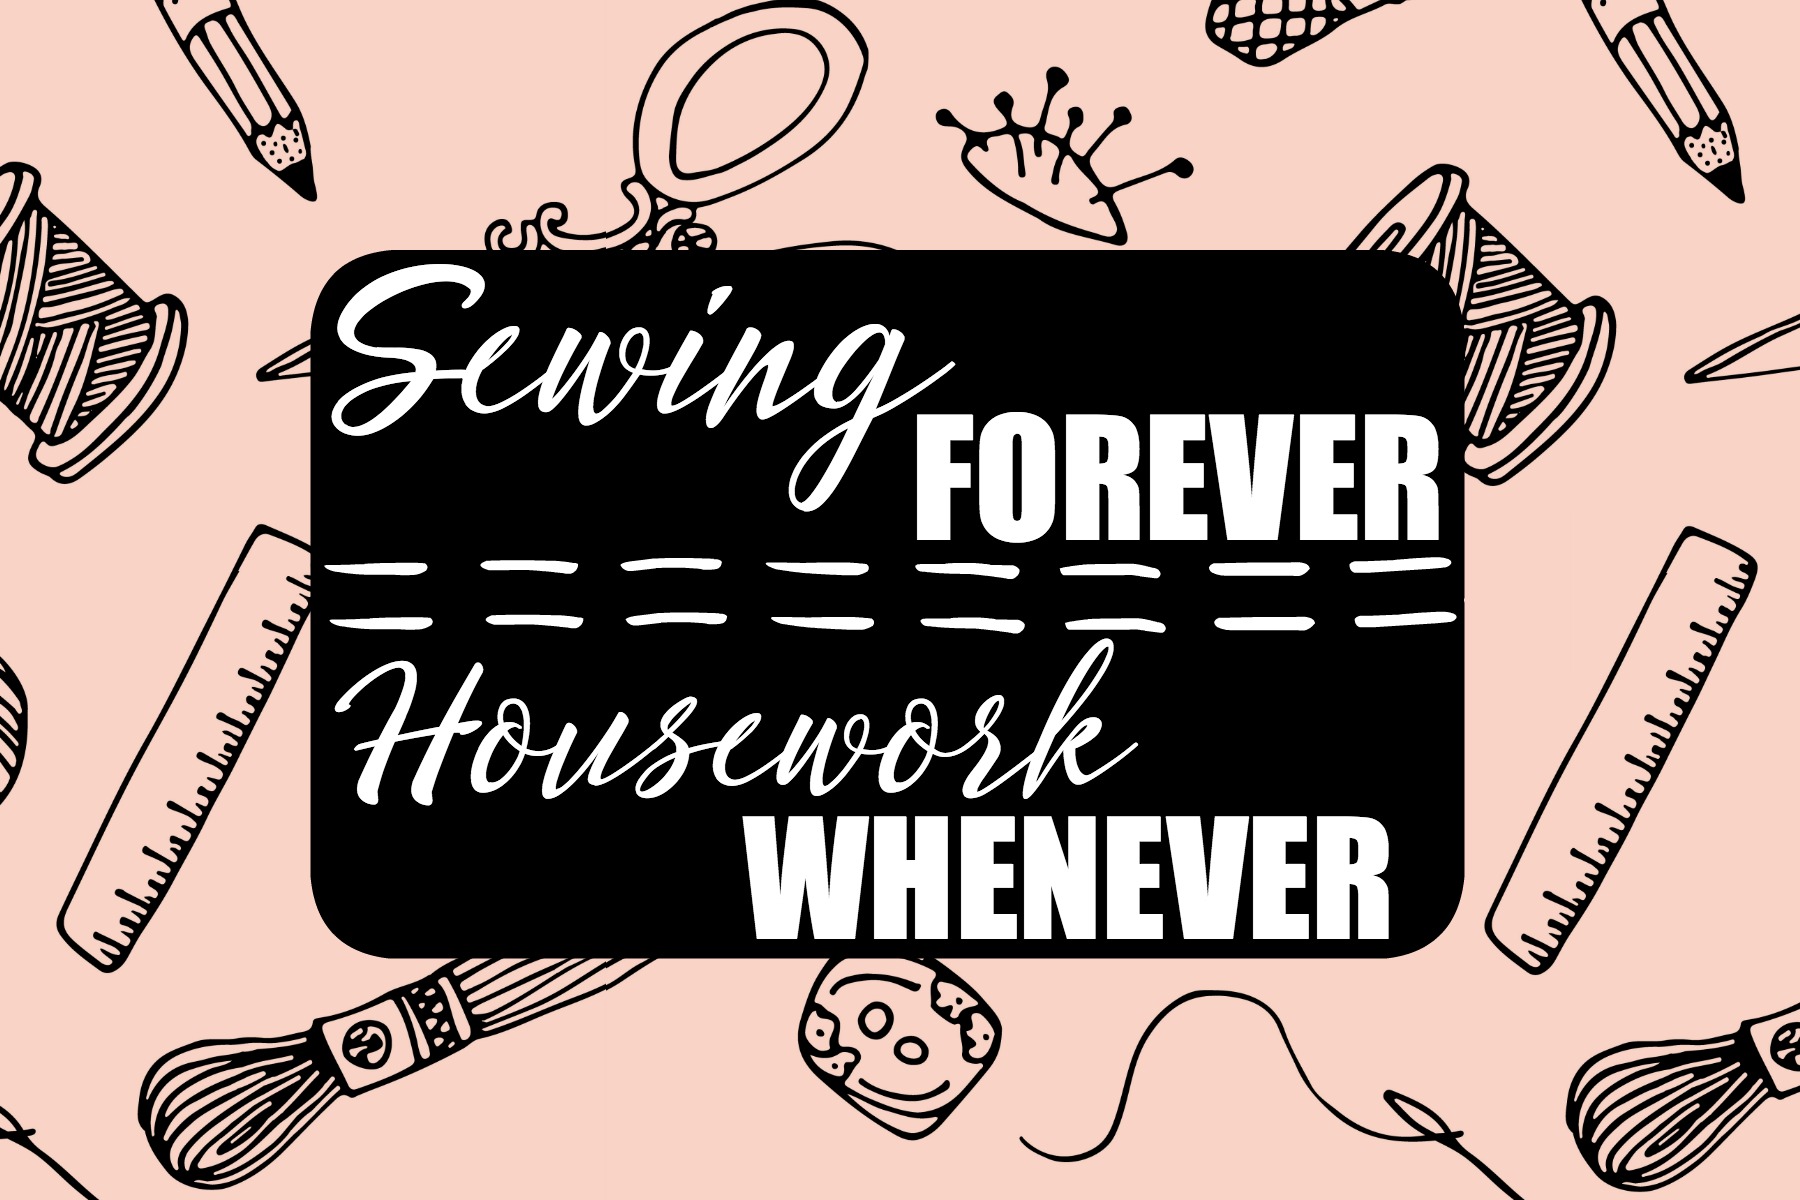 Sewing Room Printables: Sewing Forever Housework Whenever Printable | www.sewwhatalicia.com